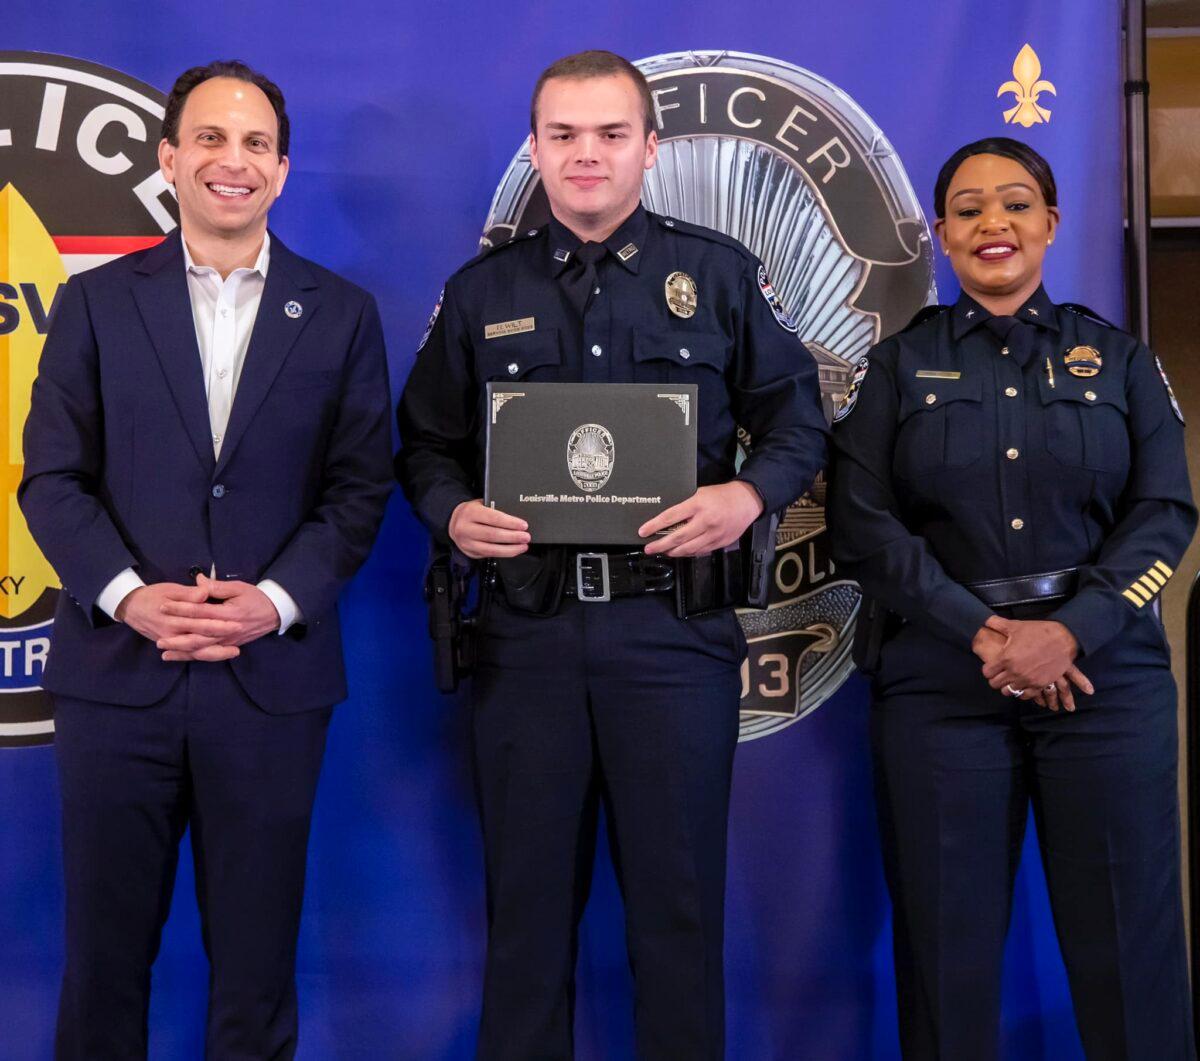 Louisville police officer Nickolas Wilt (Center) was wounded in the Old National Bank shooting. (Louisville Metro Police Department via The Epoch Times)